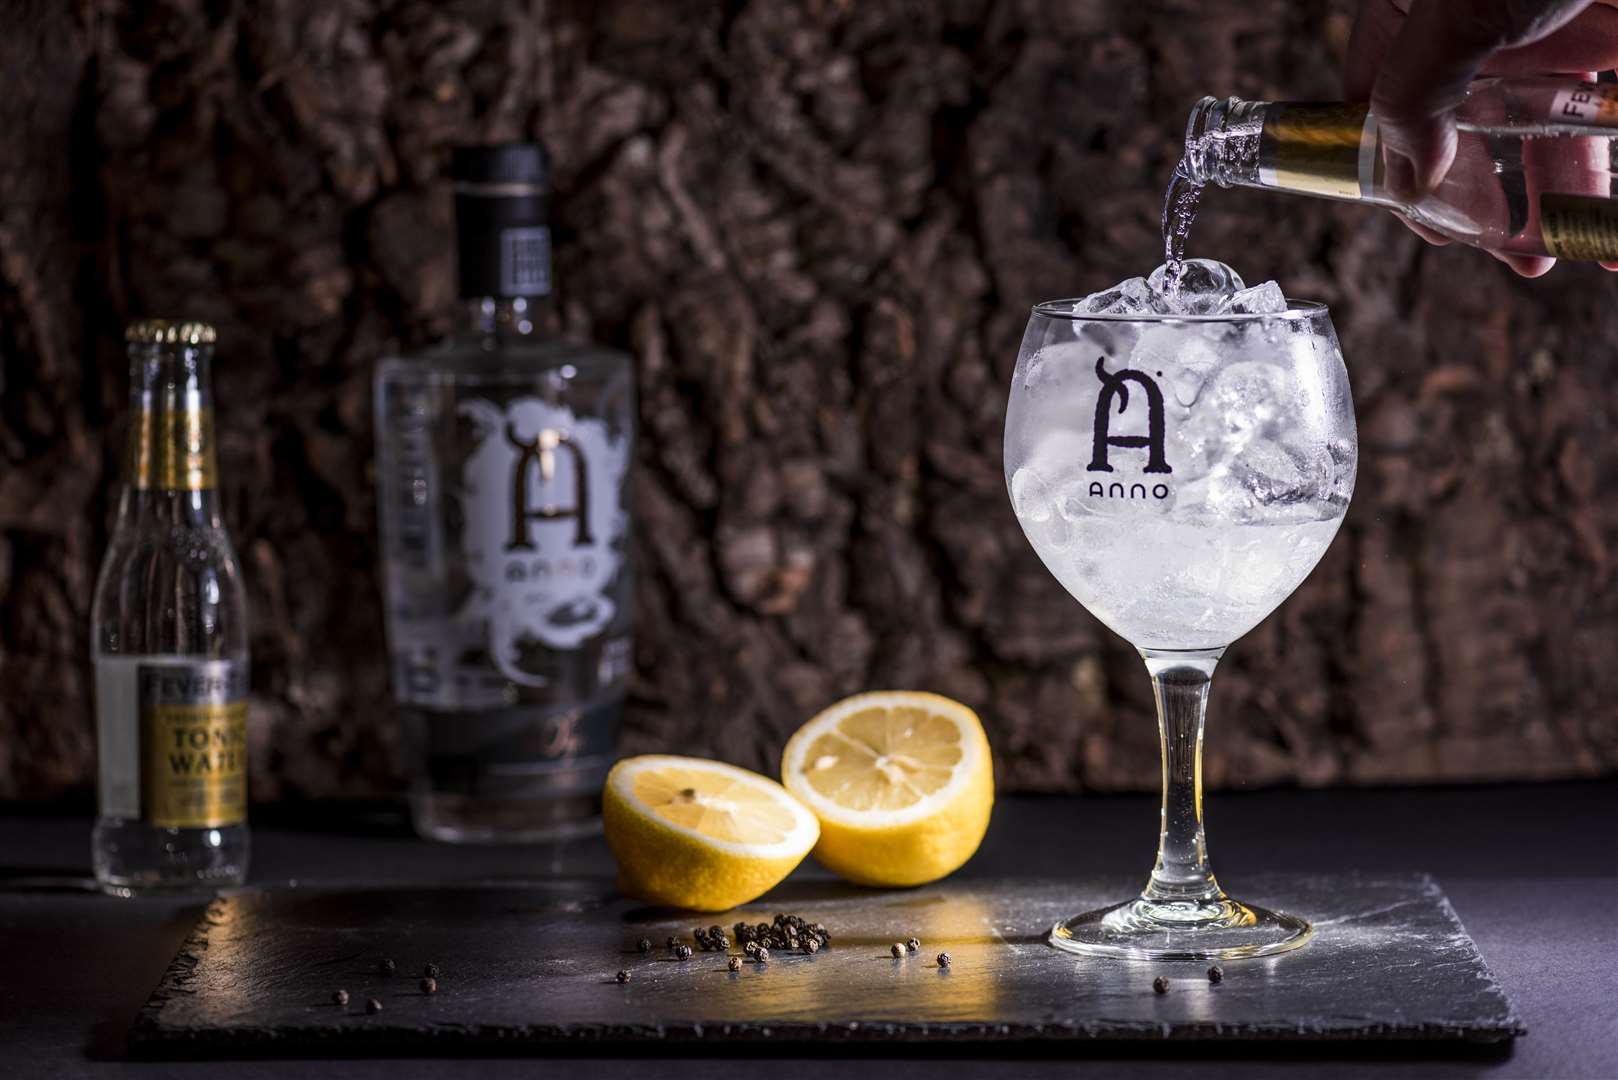 Gin from Marden's Anno Distillery will be available